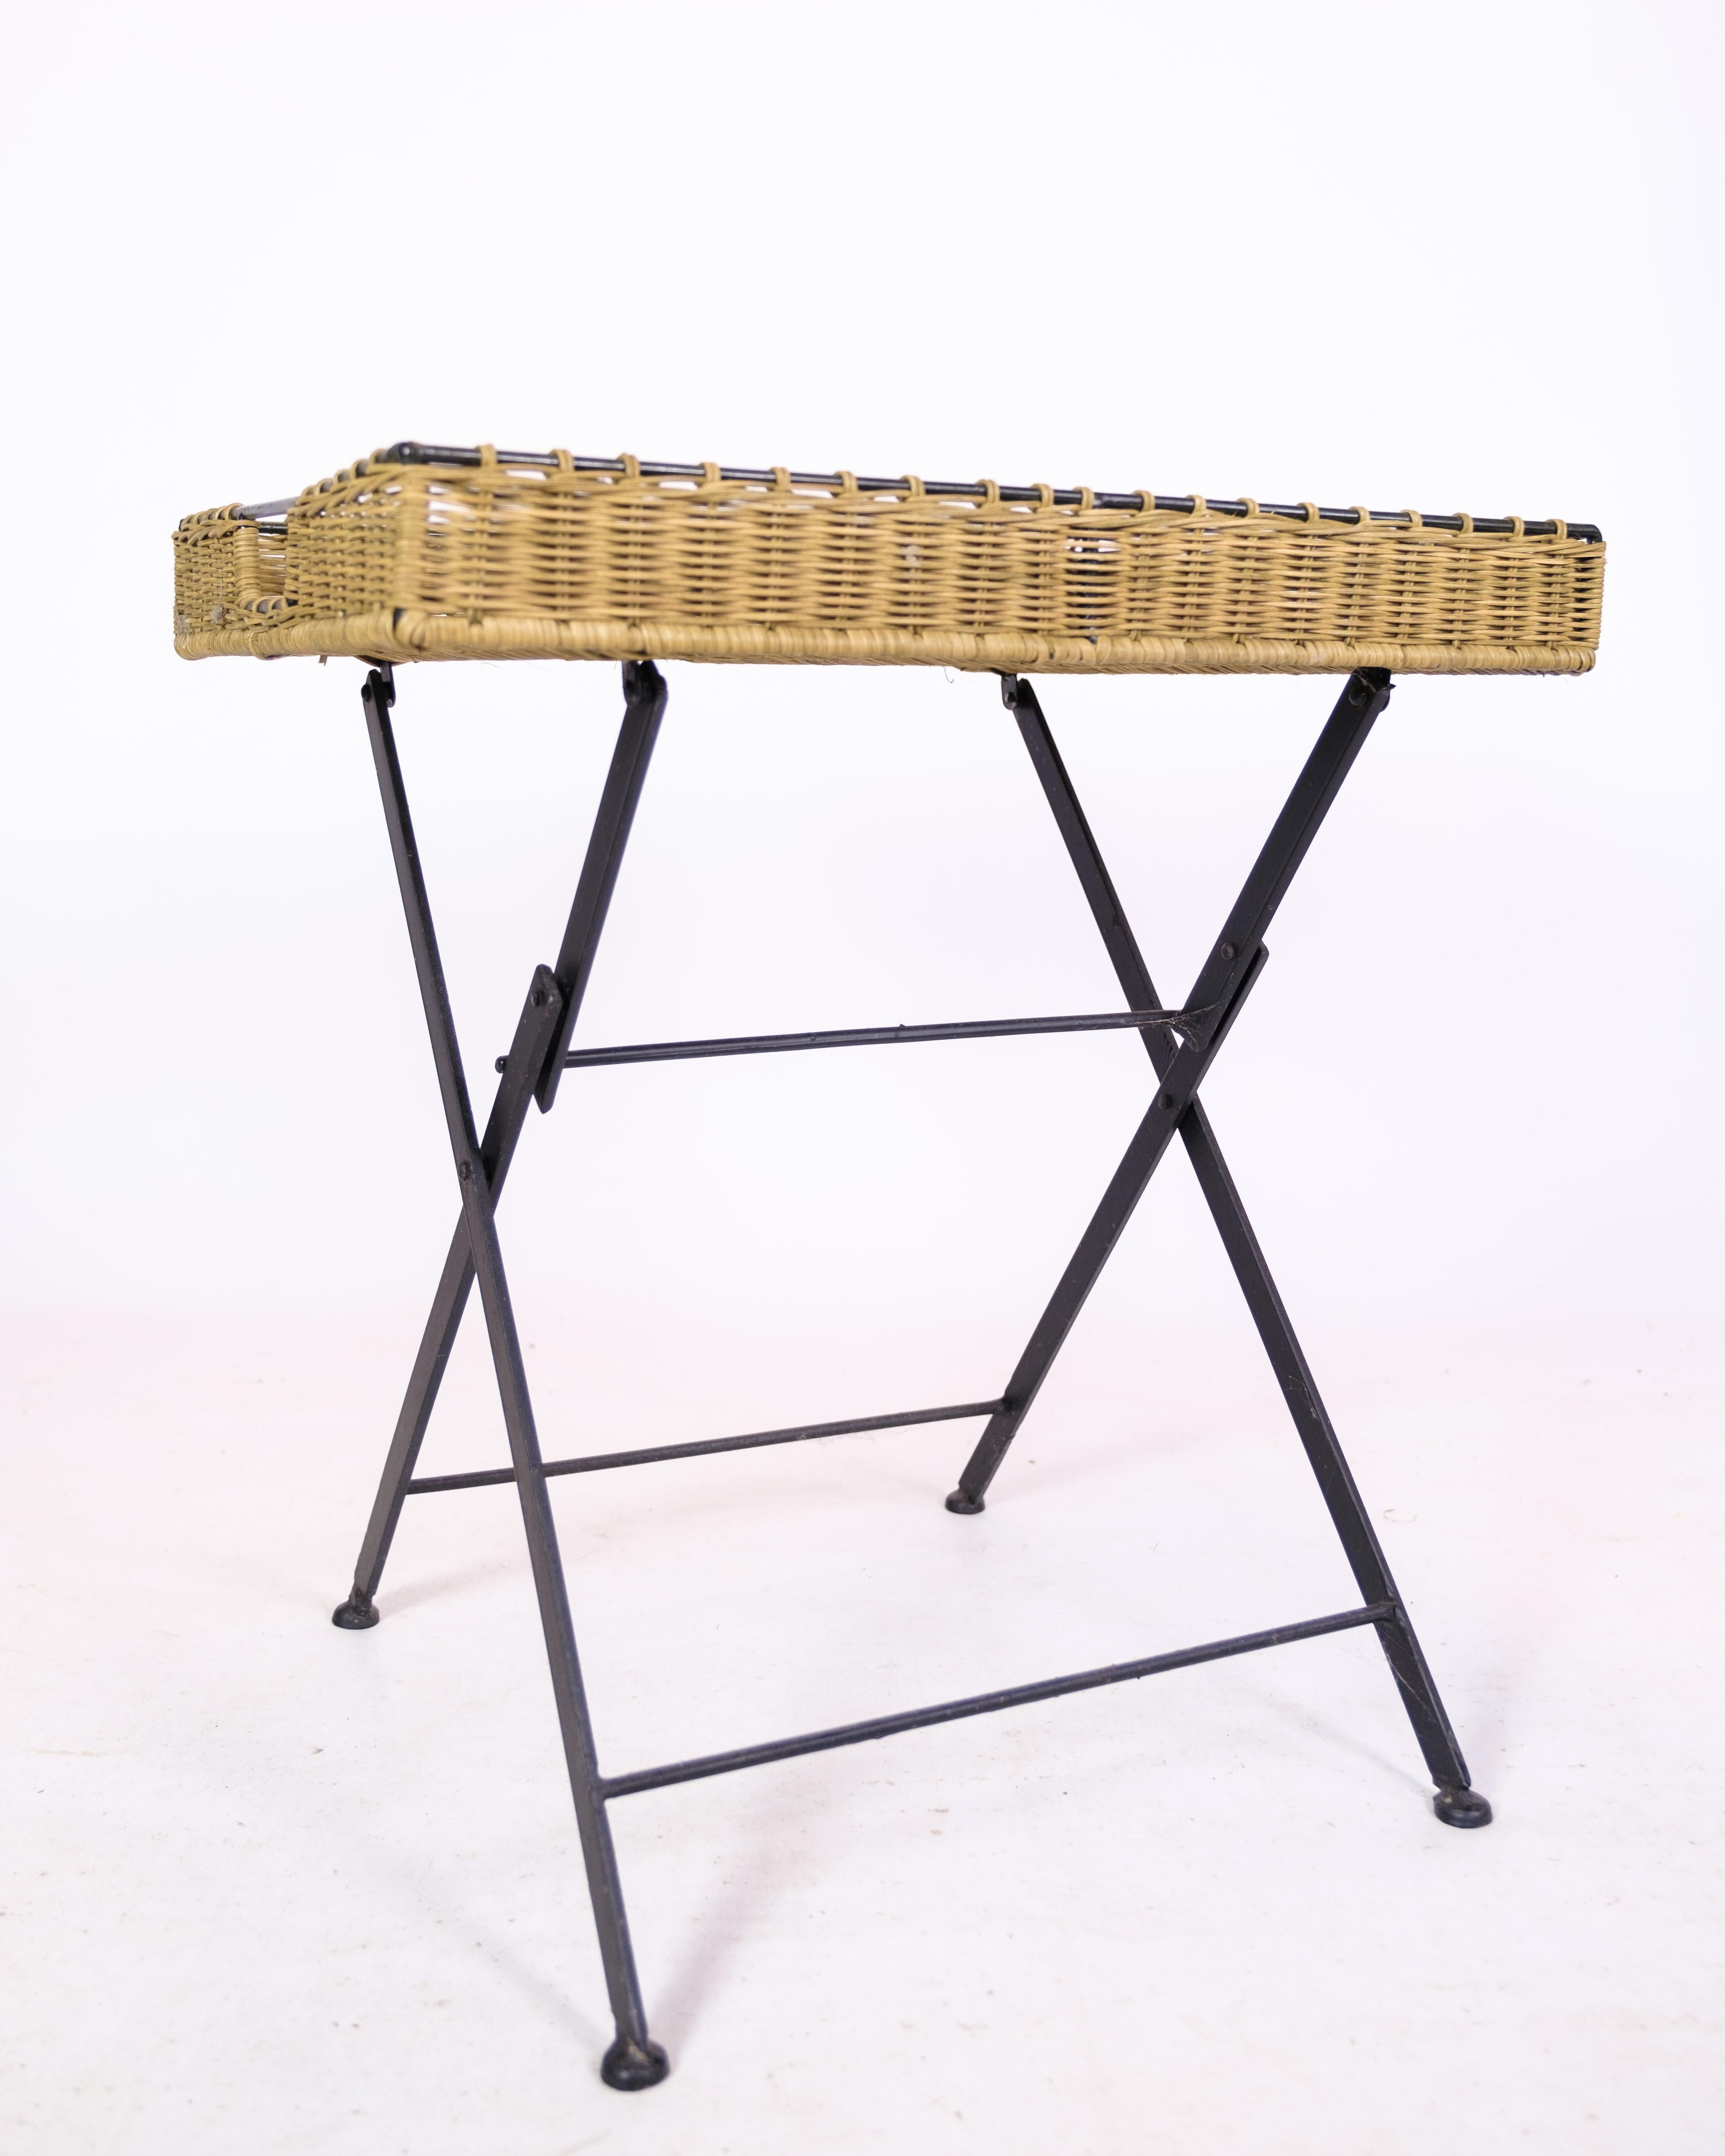 Scandinavian Modern Side Table of Wicker Tray with Metal Legs from the 1970s For Sale